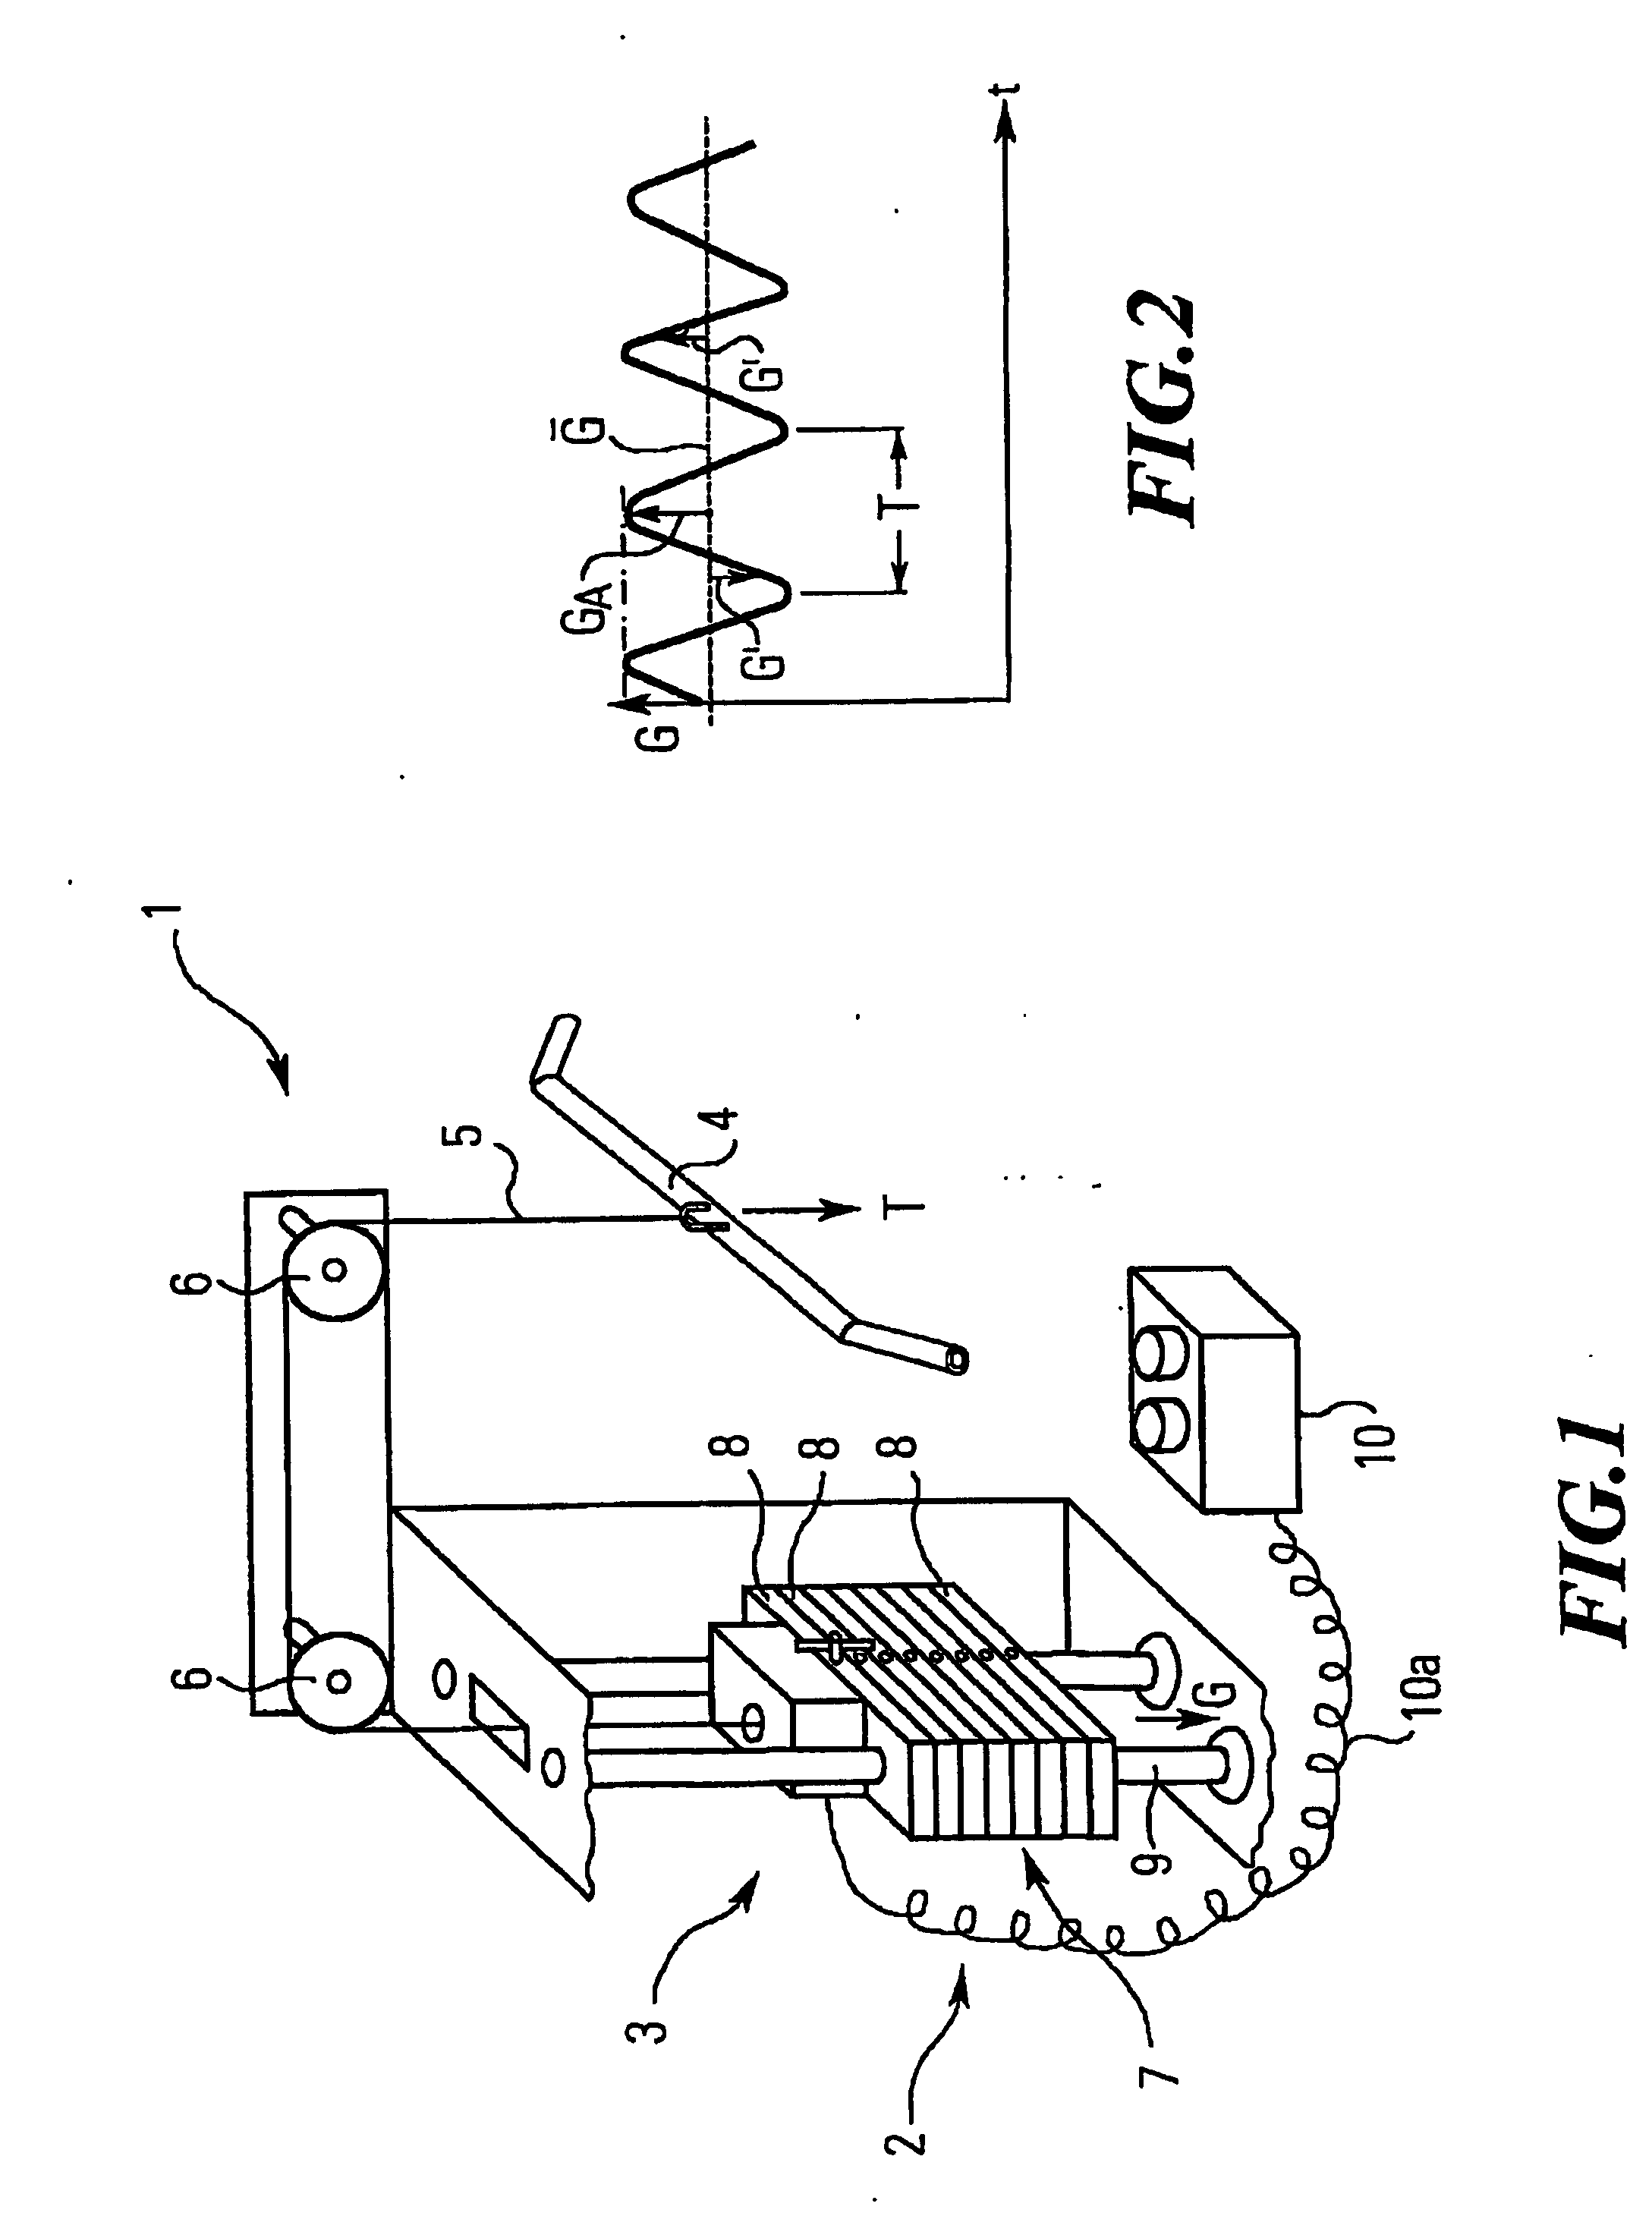 Retrofit Kit for a Training Device and Training Device